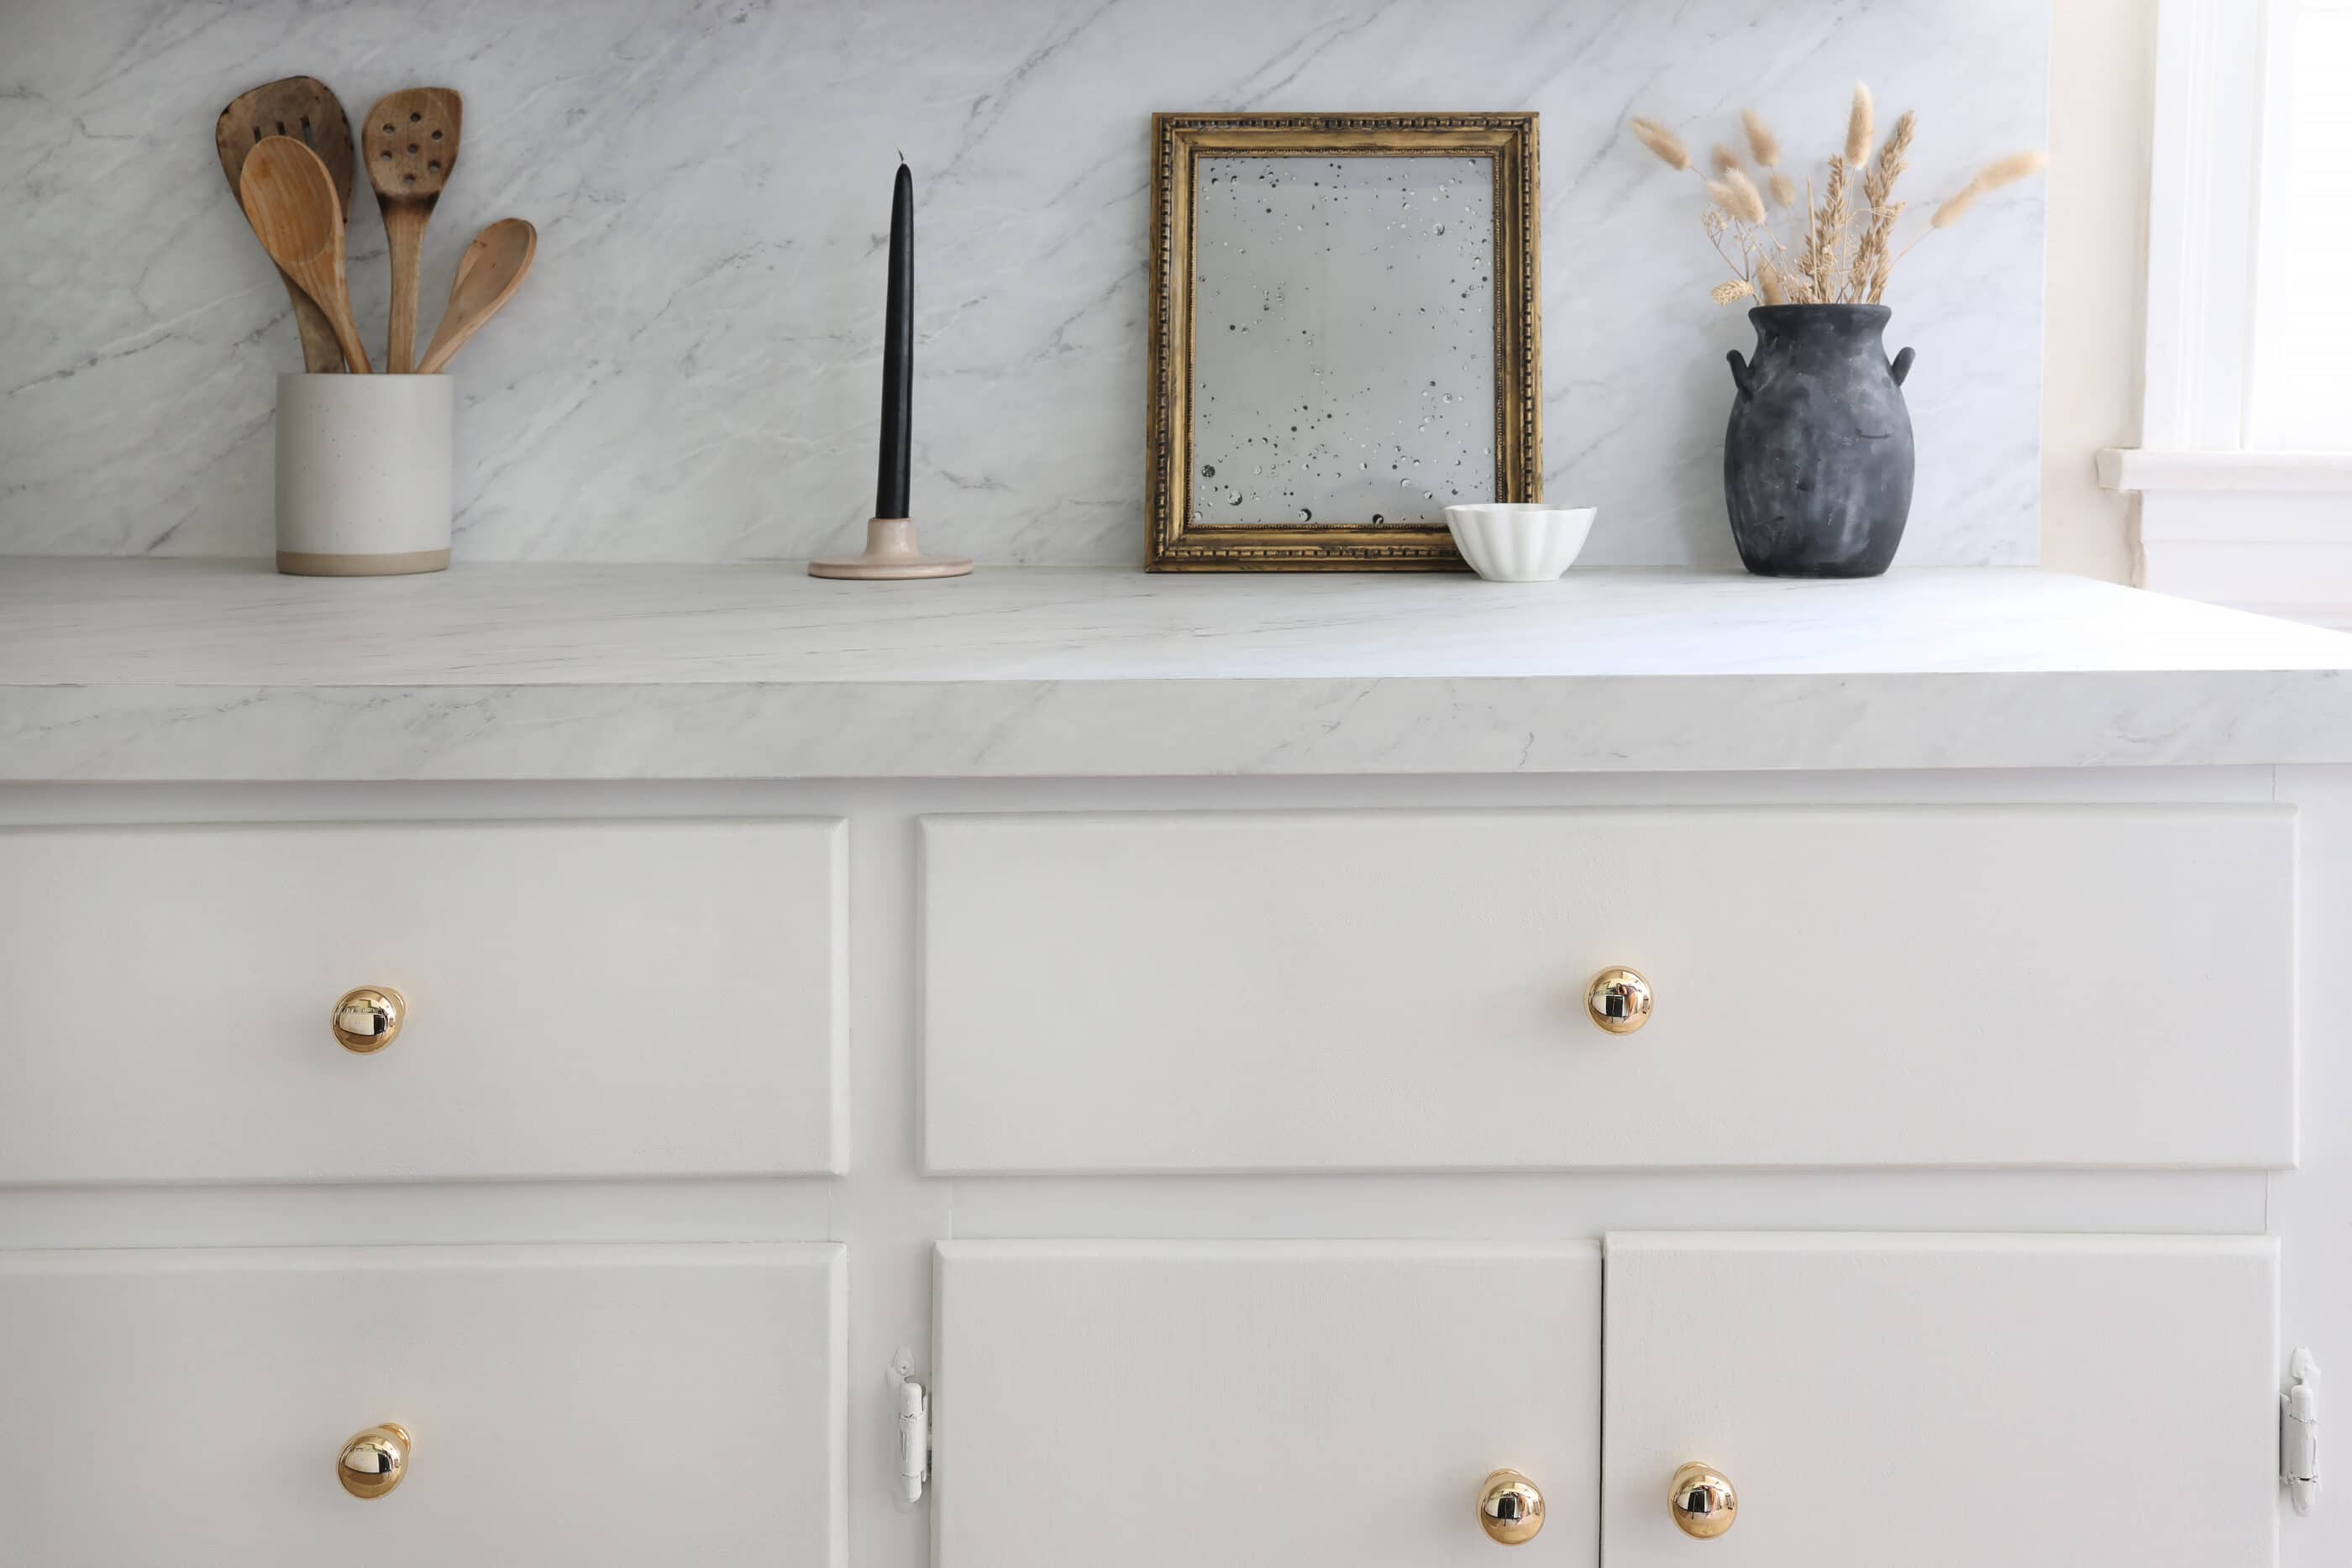 How To Replace Kitchen Cabinet Knobs With Pulls